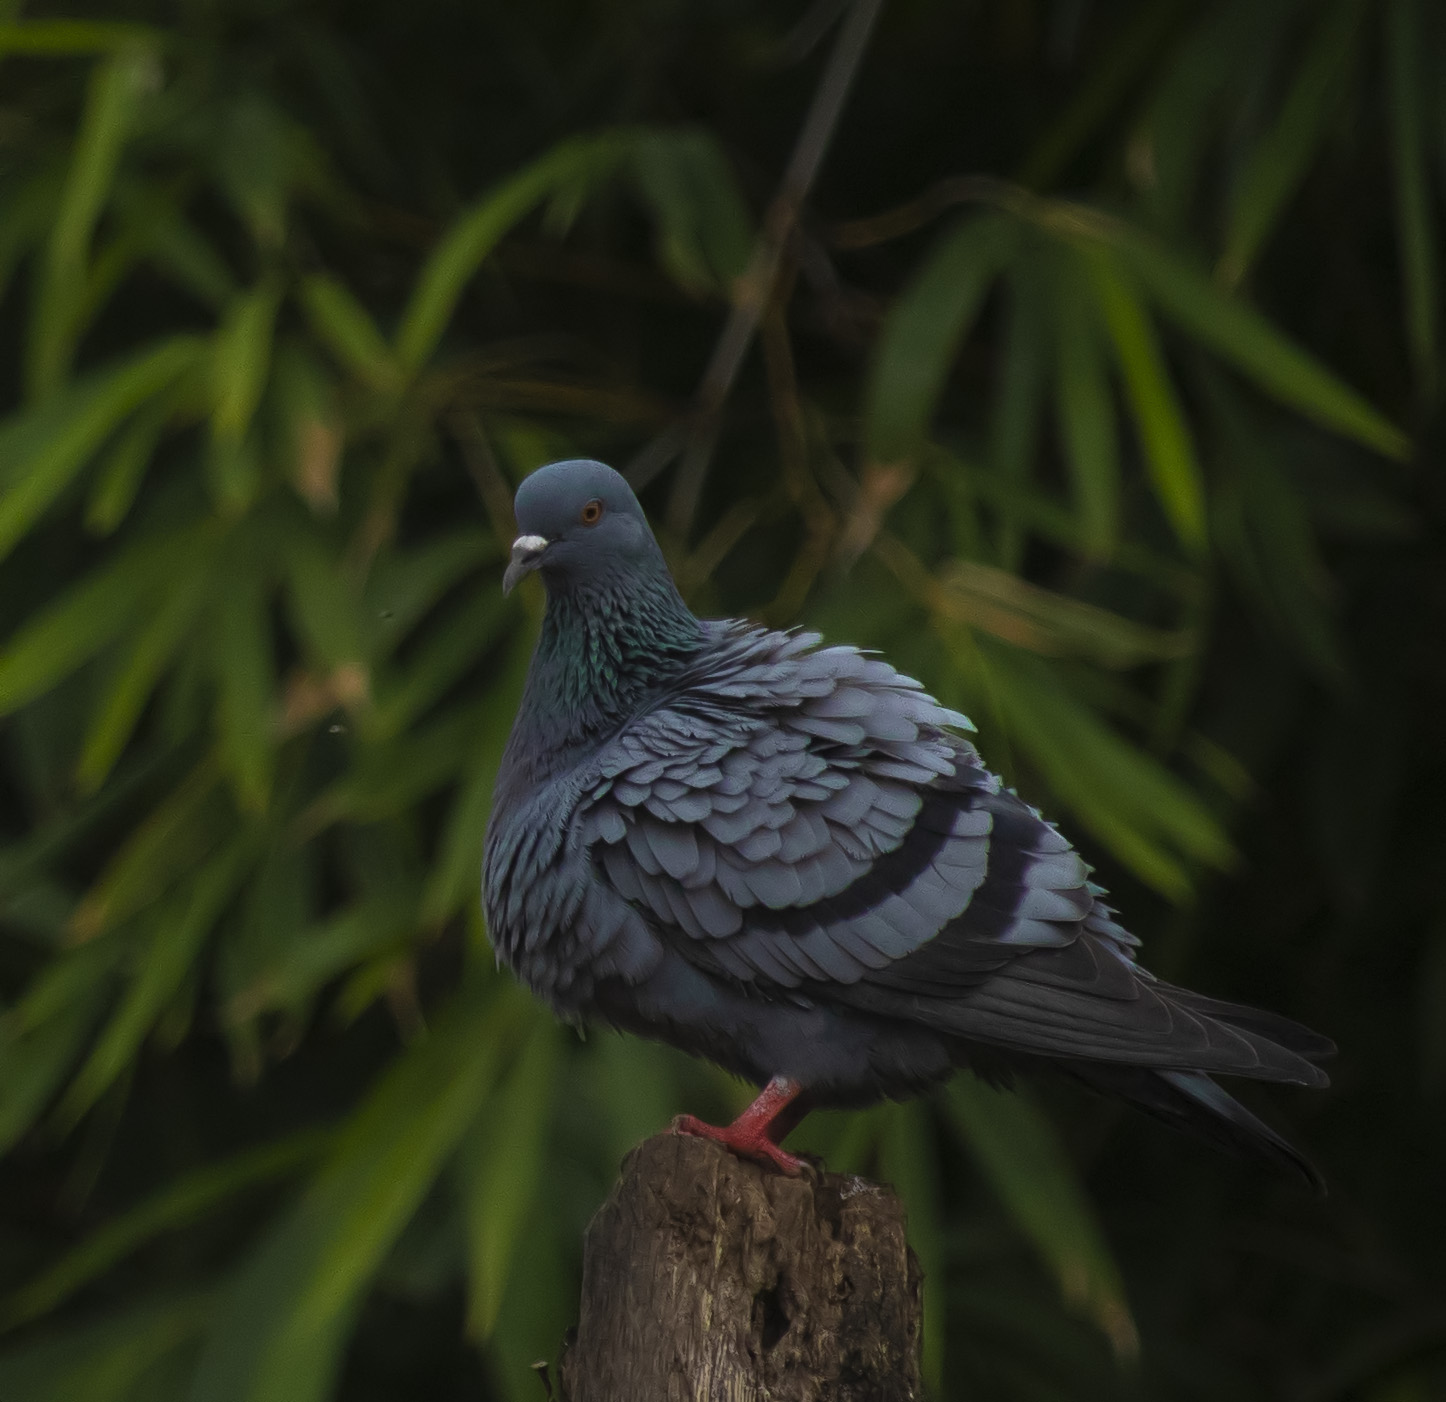 A resting pigeon